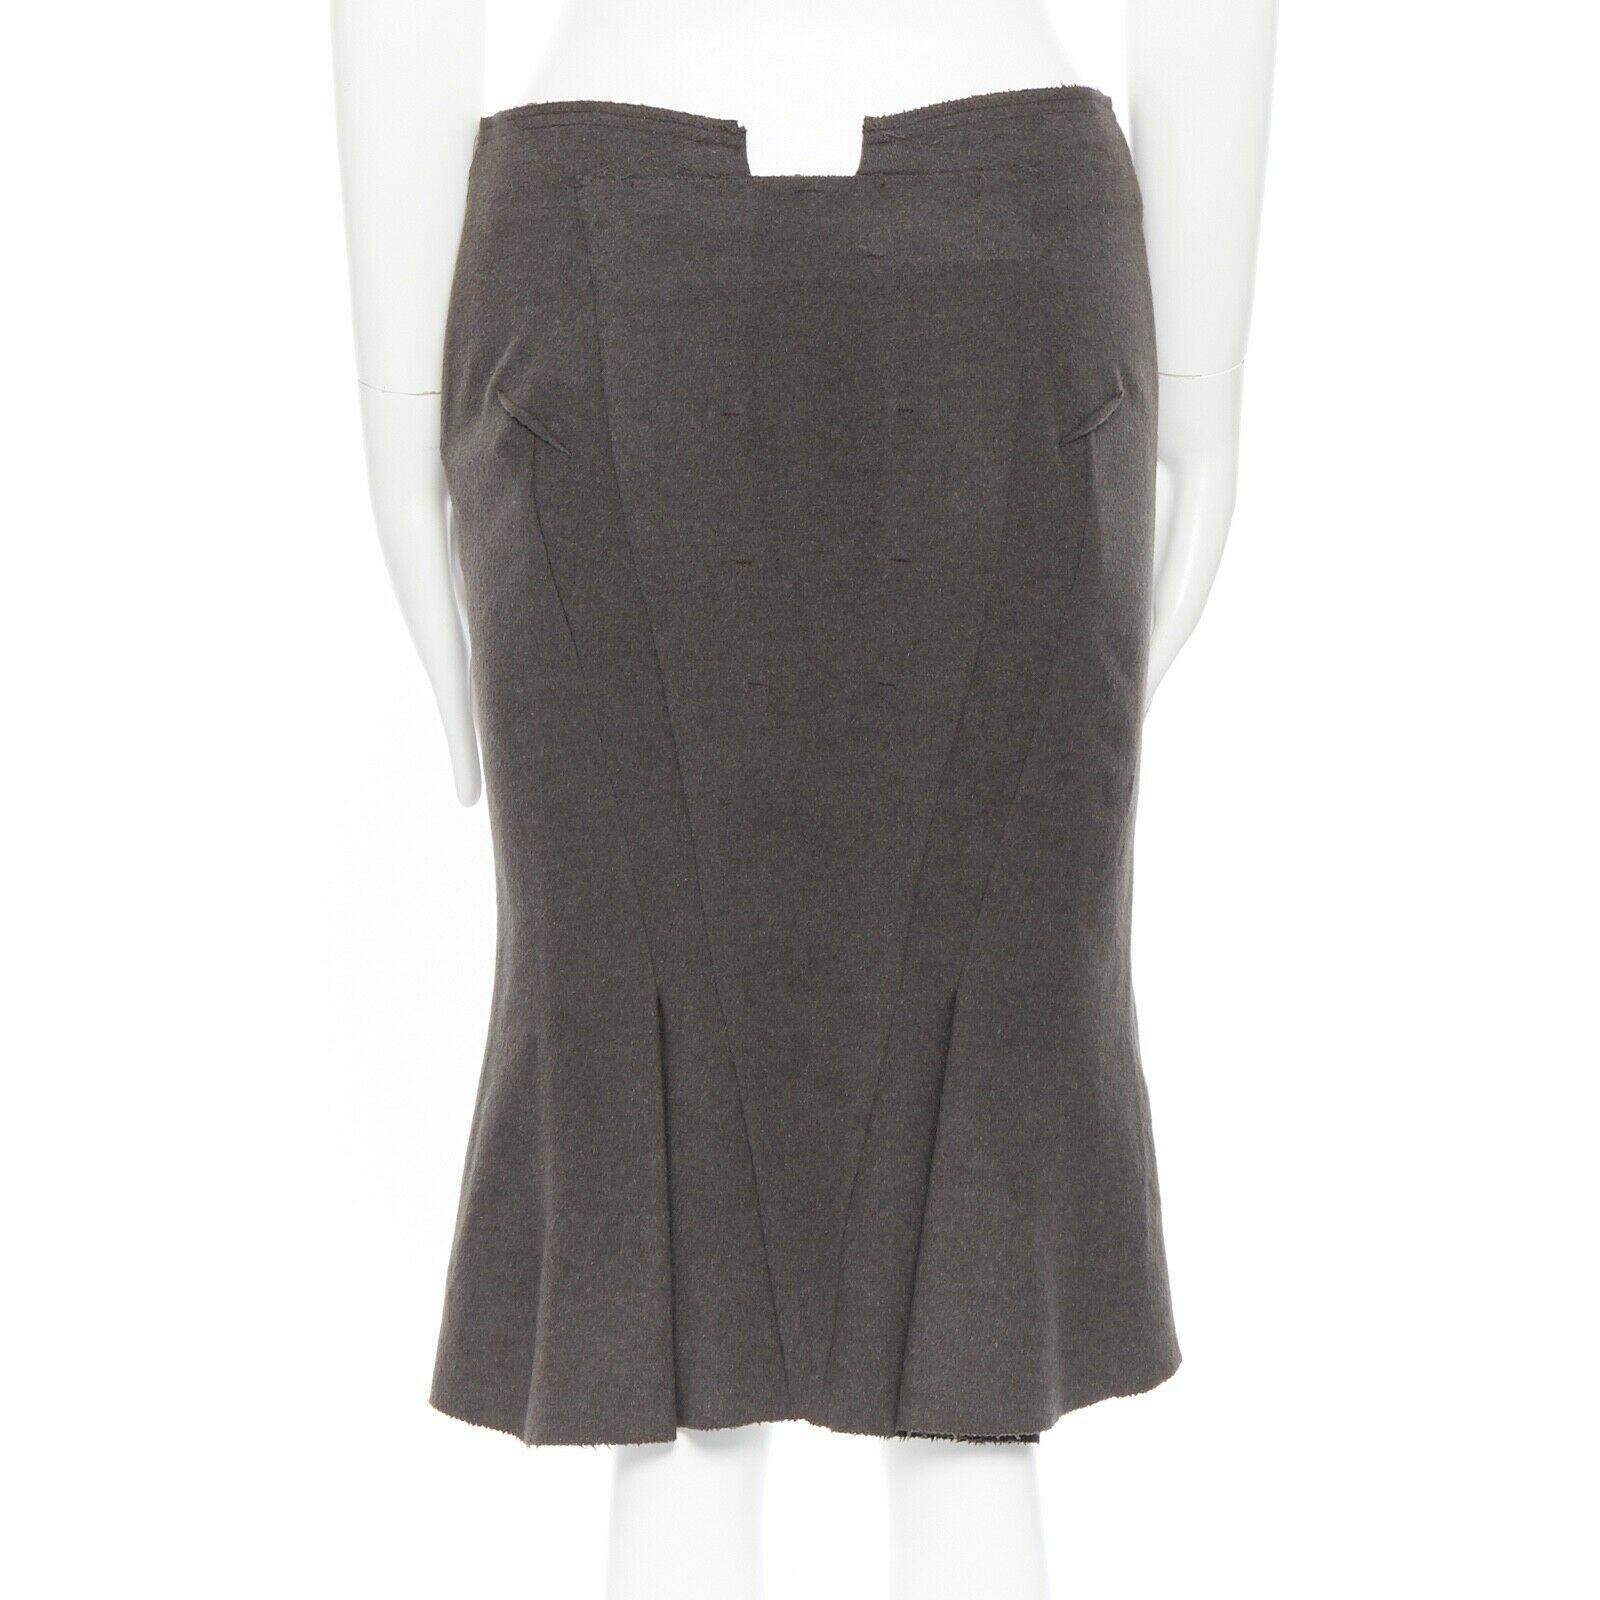 ROLAND MOURET green grey wool mohair constructed pencil skirt flare hem FR38 M Reference: TGAS/A03275 
Brand: Roland Mouret 
Designer: Roland Mouret 
Material: wool 
Color: Green 
Pattern: Solid 
Closure: Zip 
Extra Detail: High waisted pencil